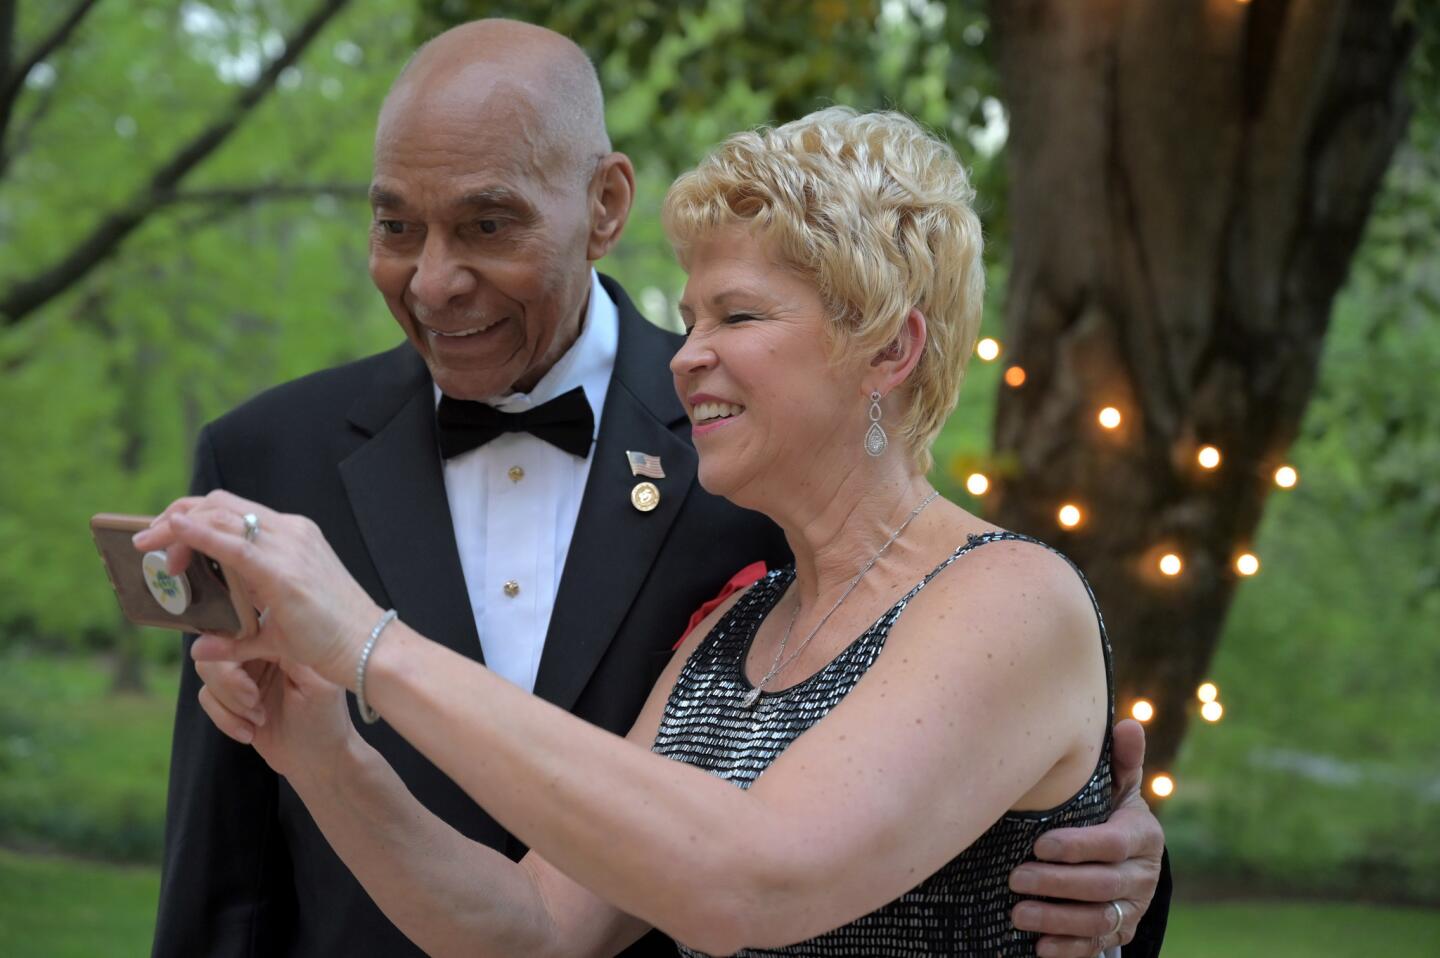 Brigadier General (USA, Ret.) George B. Price and Dr. Laura Kafka-Price at the Kappa Alpha Psi Scholarship Foundation of Columbia's Black & White Soirée.